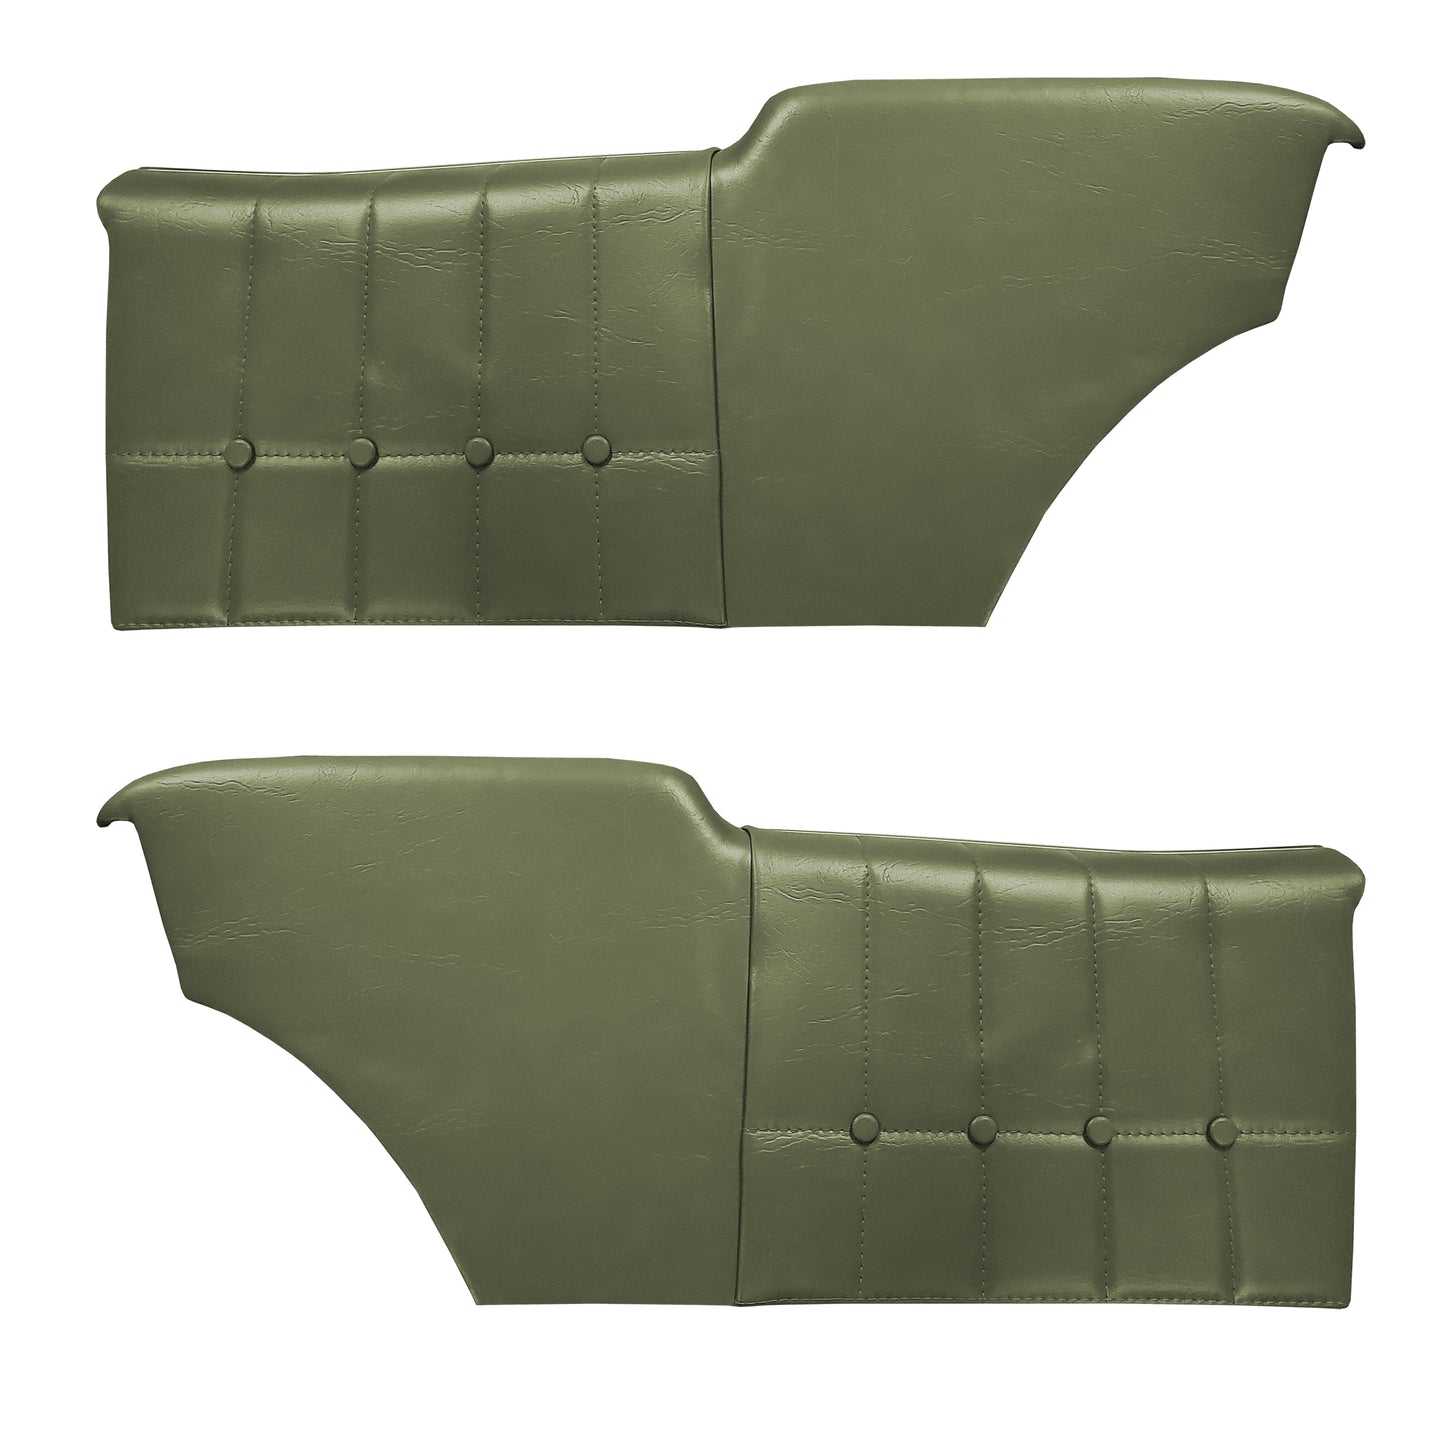 71 MONTE CARLO REAR PANEL ASSEMBLY - JADE GREEN